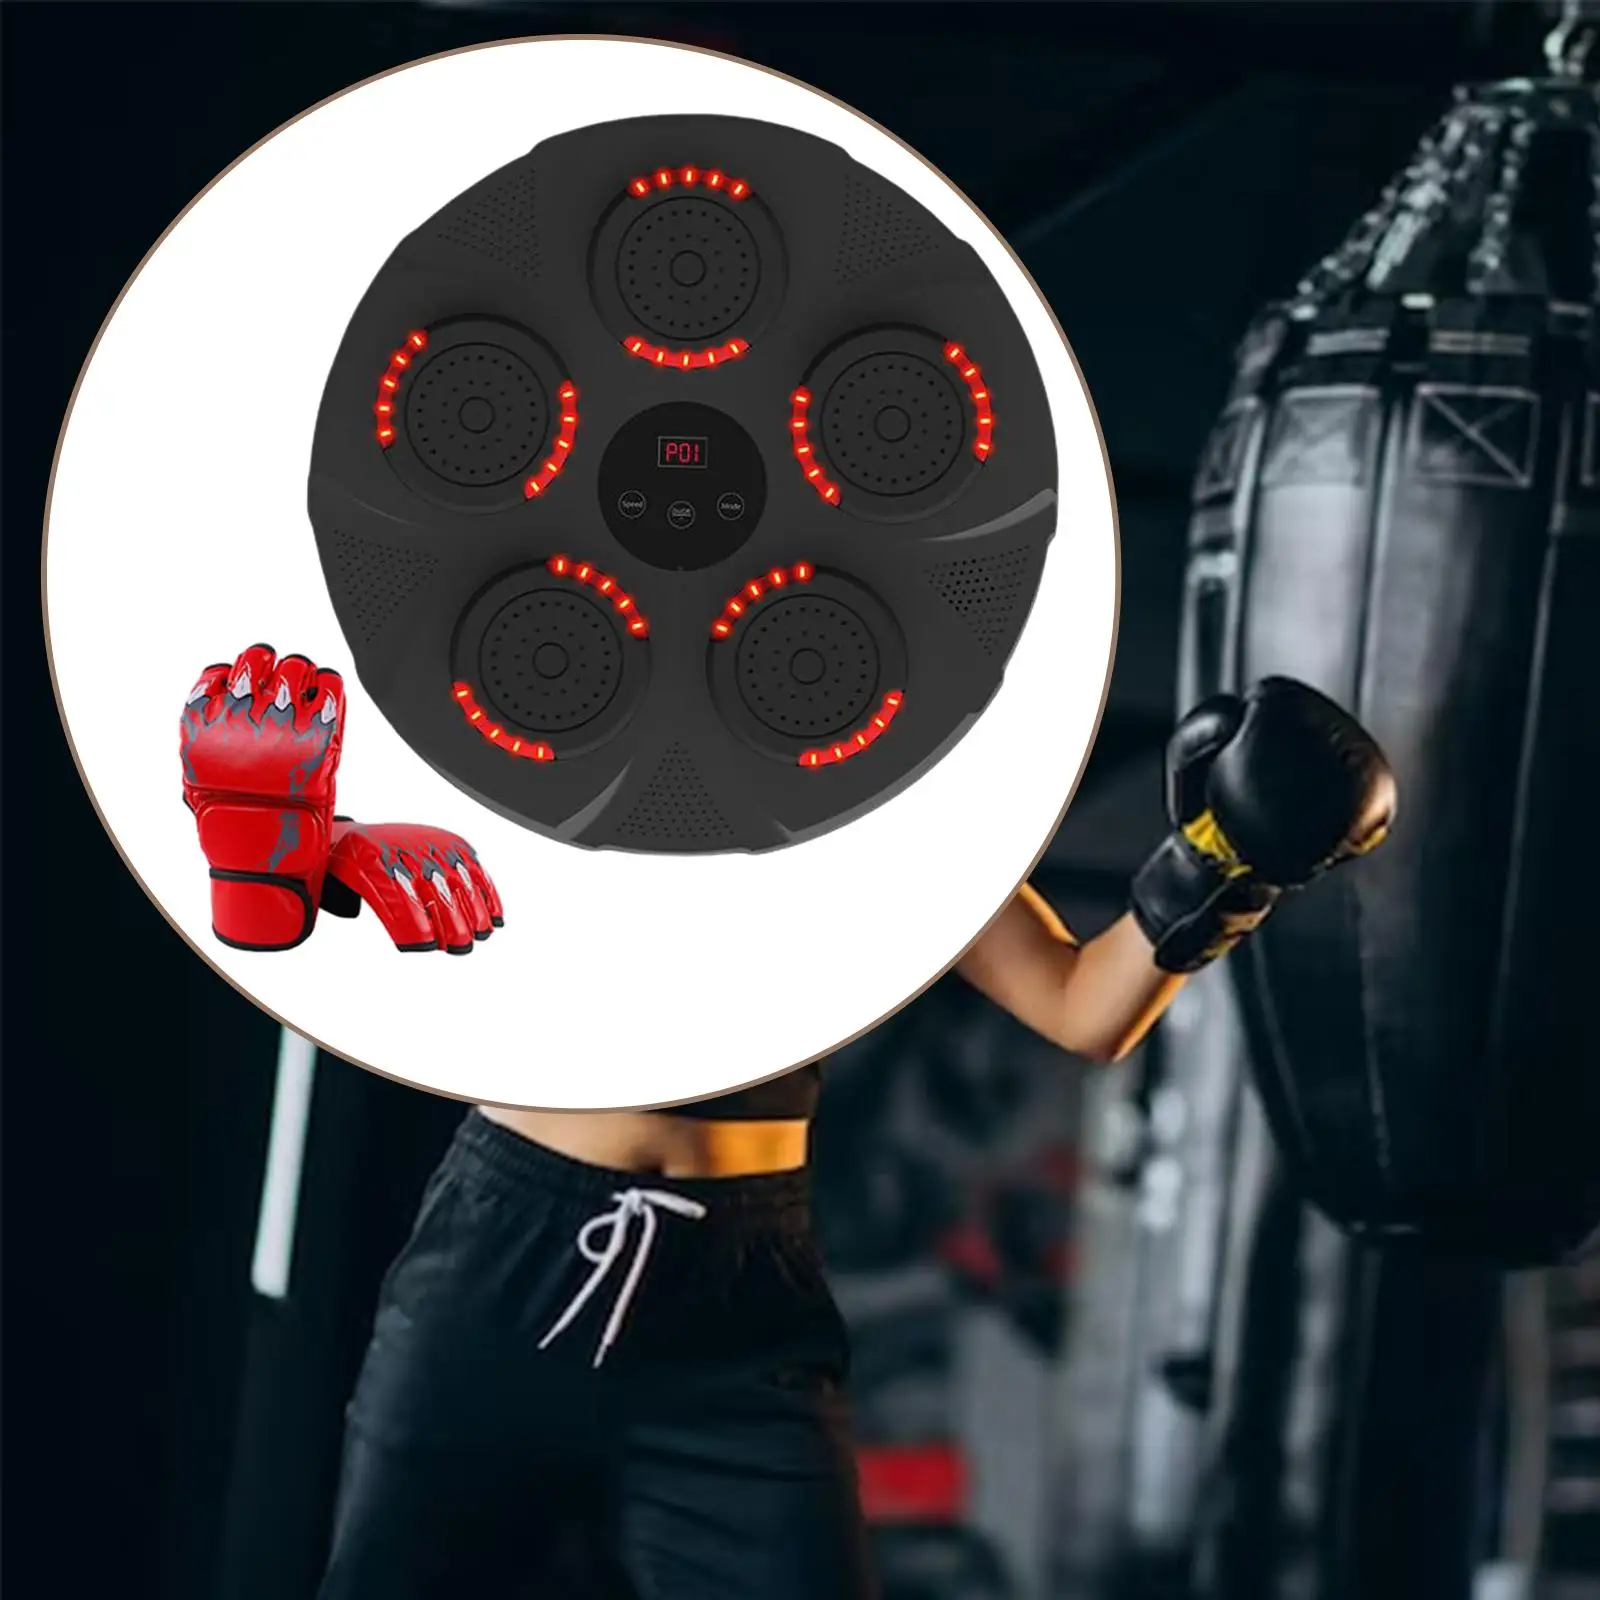 Music Boxing Training Machine Competitions Game Electronic Wall Target